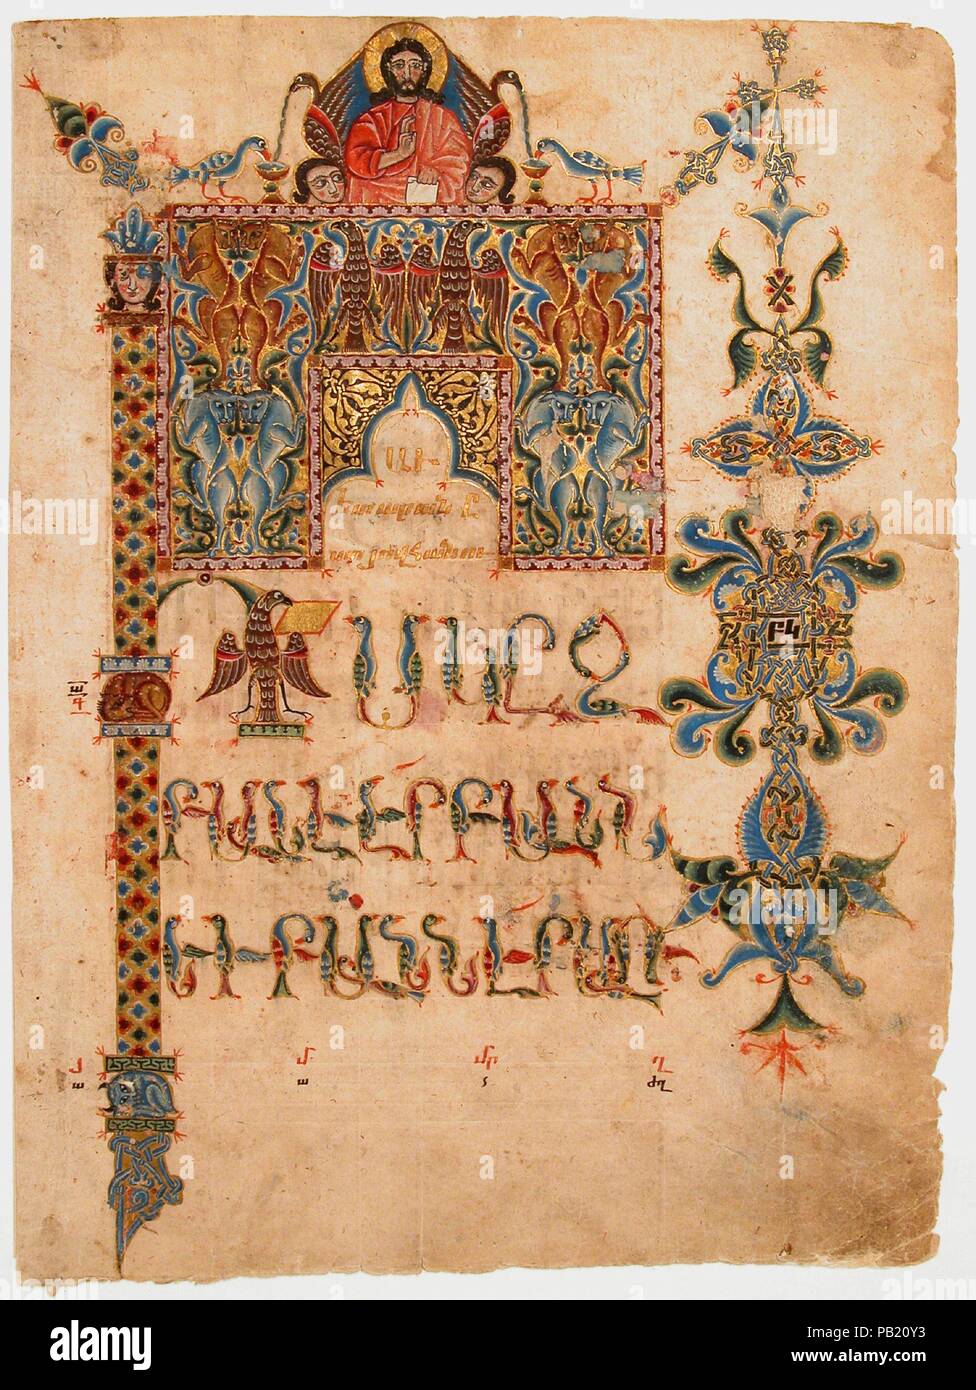 Title Page of the Gospel of John. Dimensions: Page: H. 12 1/2 in. (31.7 cm)  W. 9 1/4 in. (23.5cm)  Mat: H. 19 3/16 in. (48.7 cm)  W. 14 5/16 in. (36.4 cm). Illuminator: Sargis (active early 14th century). Date: 1300-1310.  This richly decorated leaf emphasizes the Gospel of John as the summation of the four Gospels by including the symbols of the four evangelists--an angel for Saint Matthew, a lion for Saint Mark, an ox for Saint Luke, an eagle for Saint John--in the large first letter, or incipit, and in the elaborate headpiece over the text. Byzantine-style geometric patterns fill the rest  Stock Photo